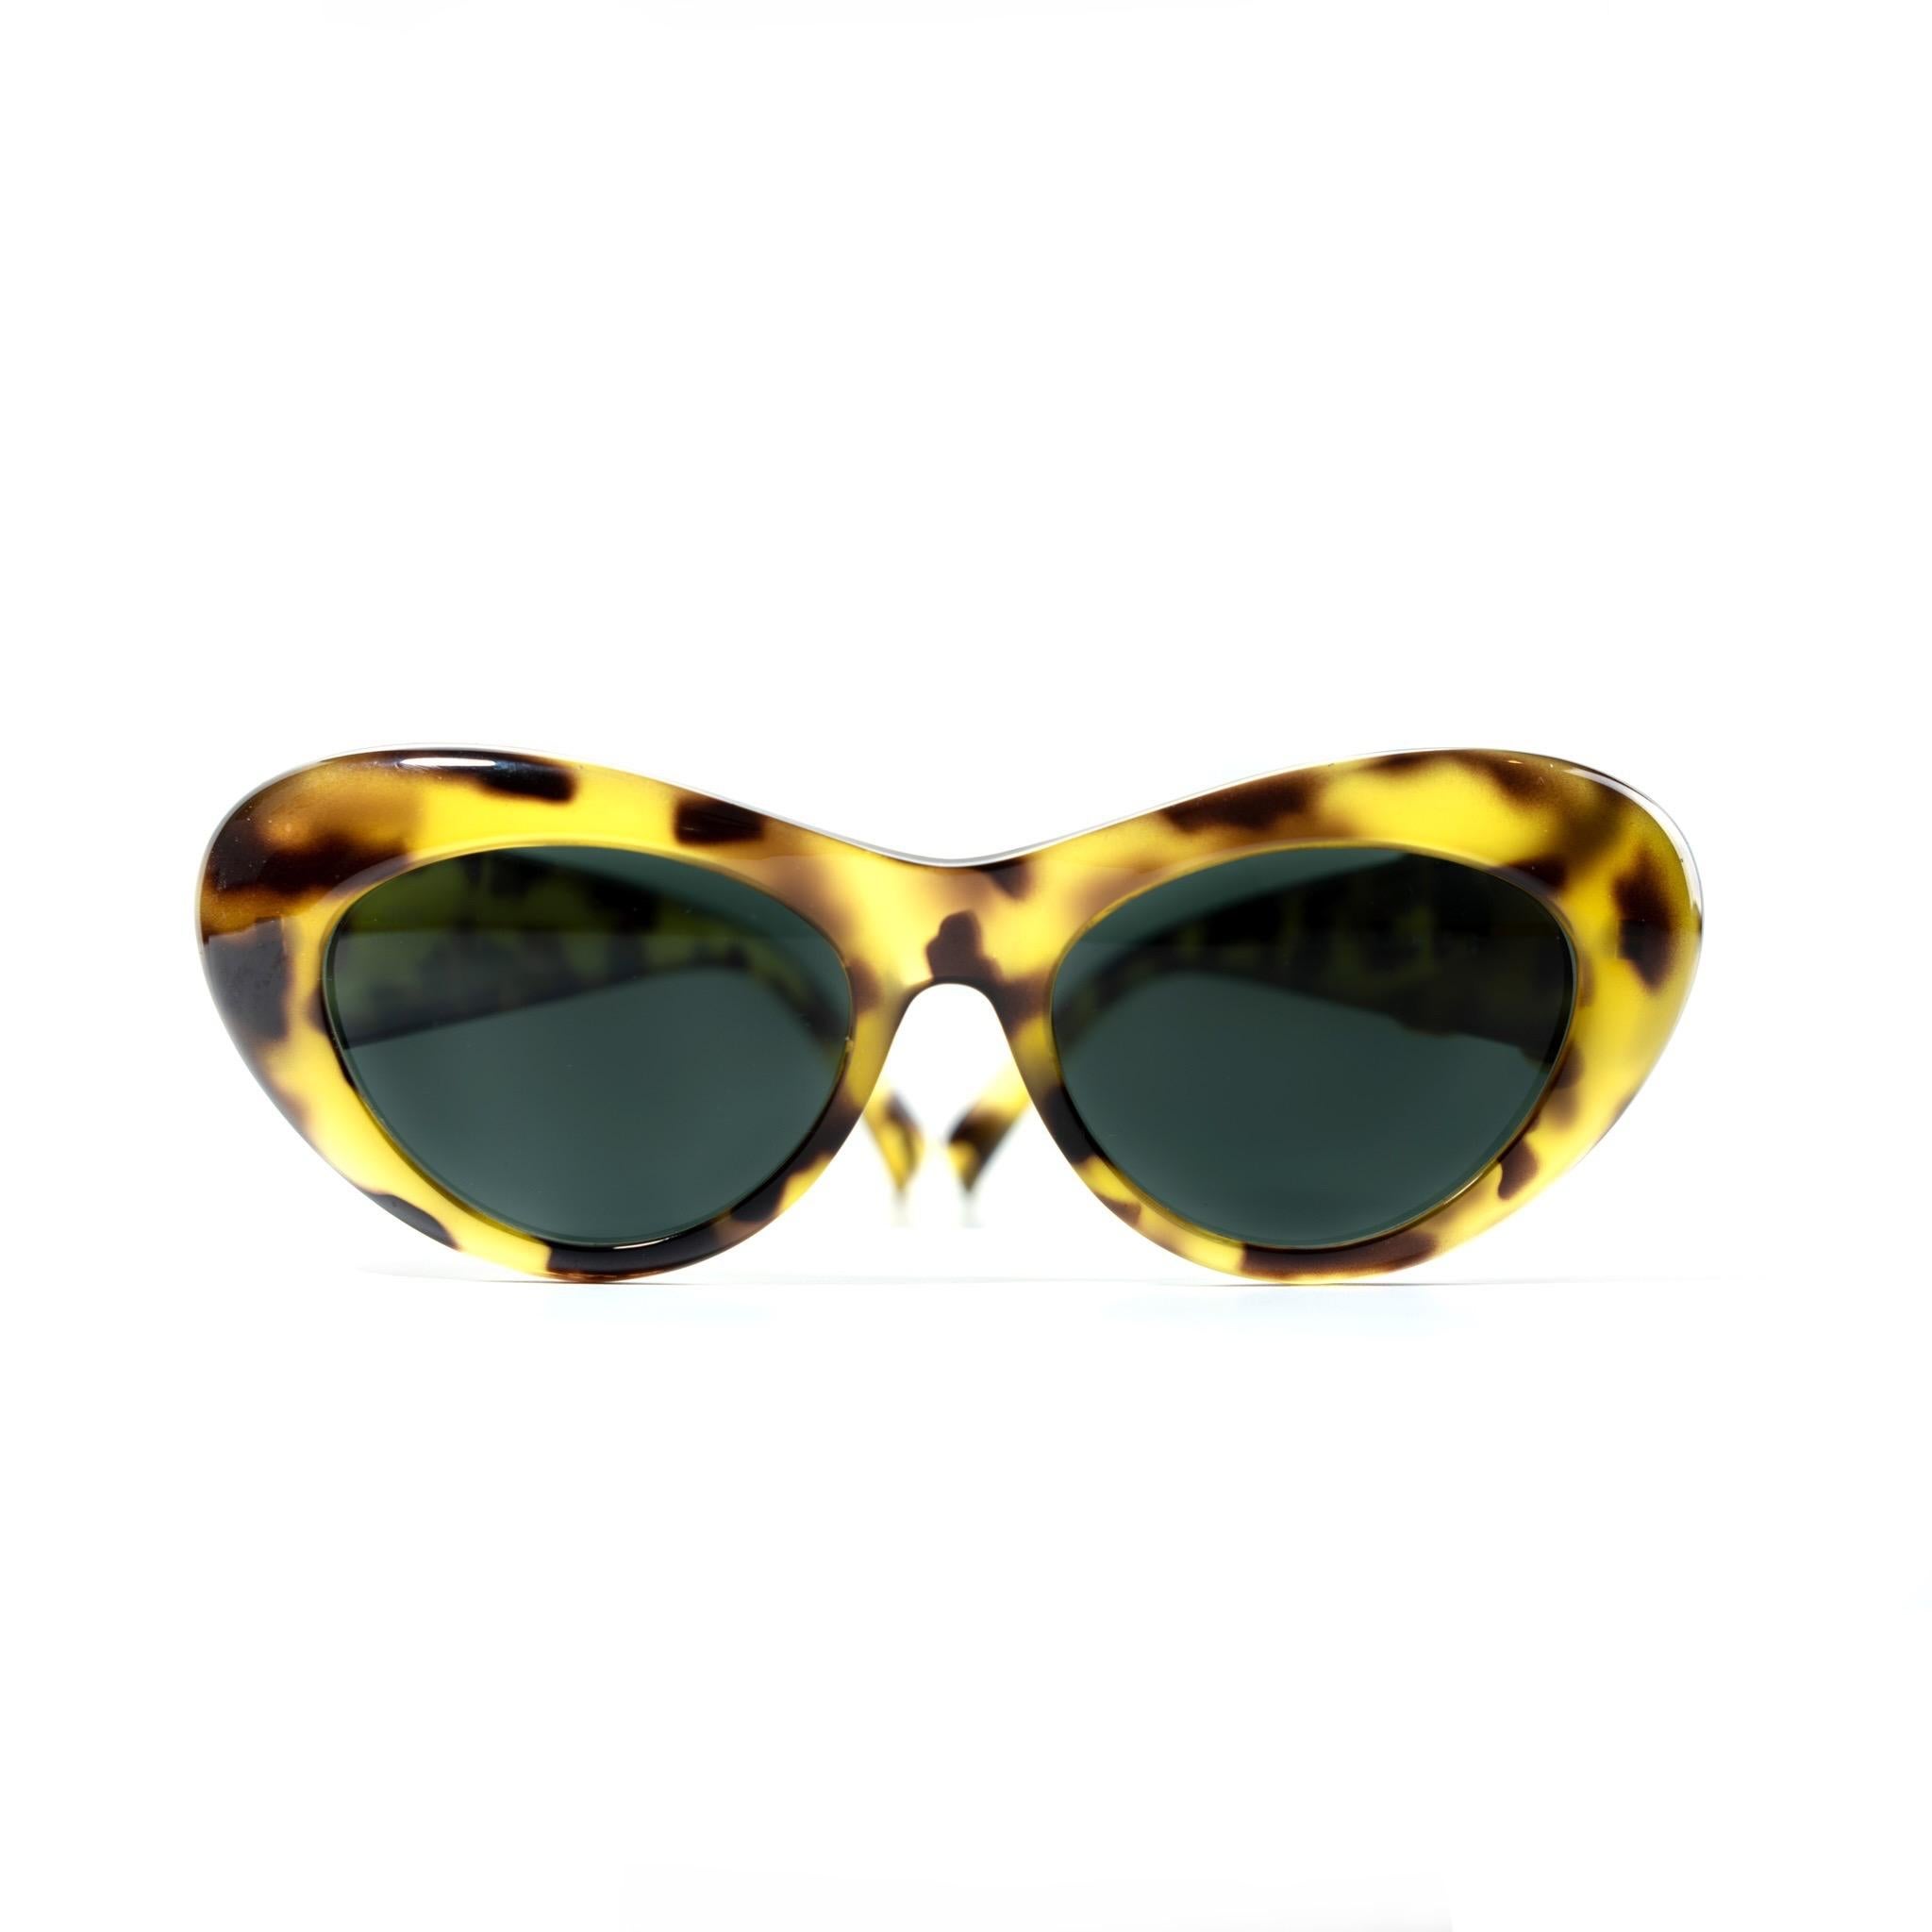 Gianni Versace 80s sunglasses.
Featuring an oval cat-eye tortoise frame with black lenses. Included on the arms there’s a star in gold hardware with rhinestone embellishing. Measurements:
Width: 5 cm
Length: 15 cm
Place of origin: Italy